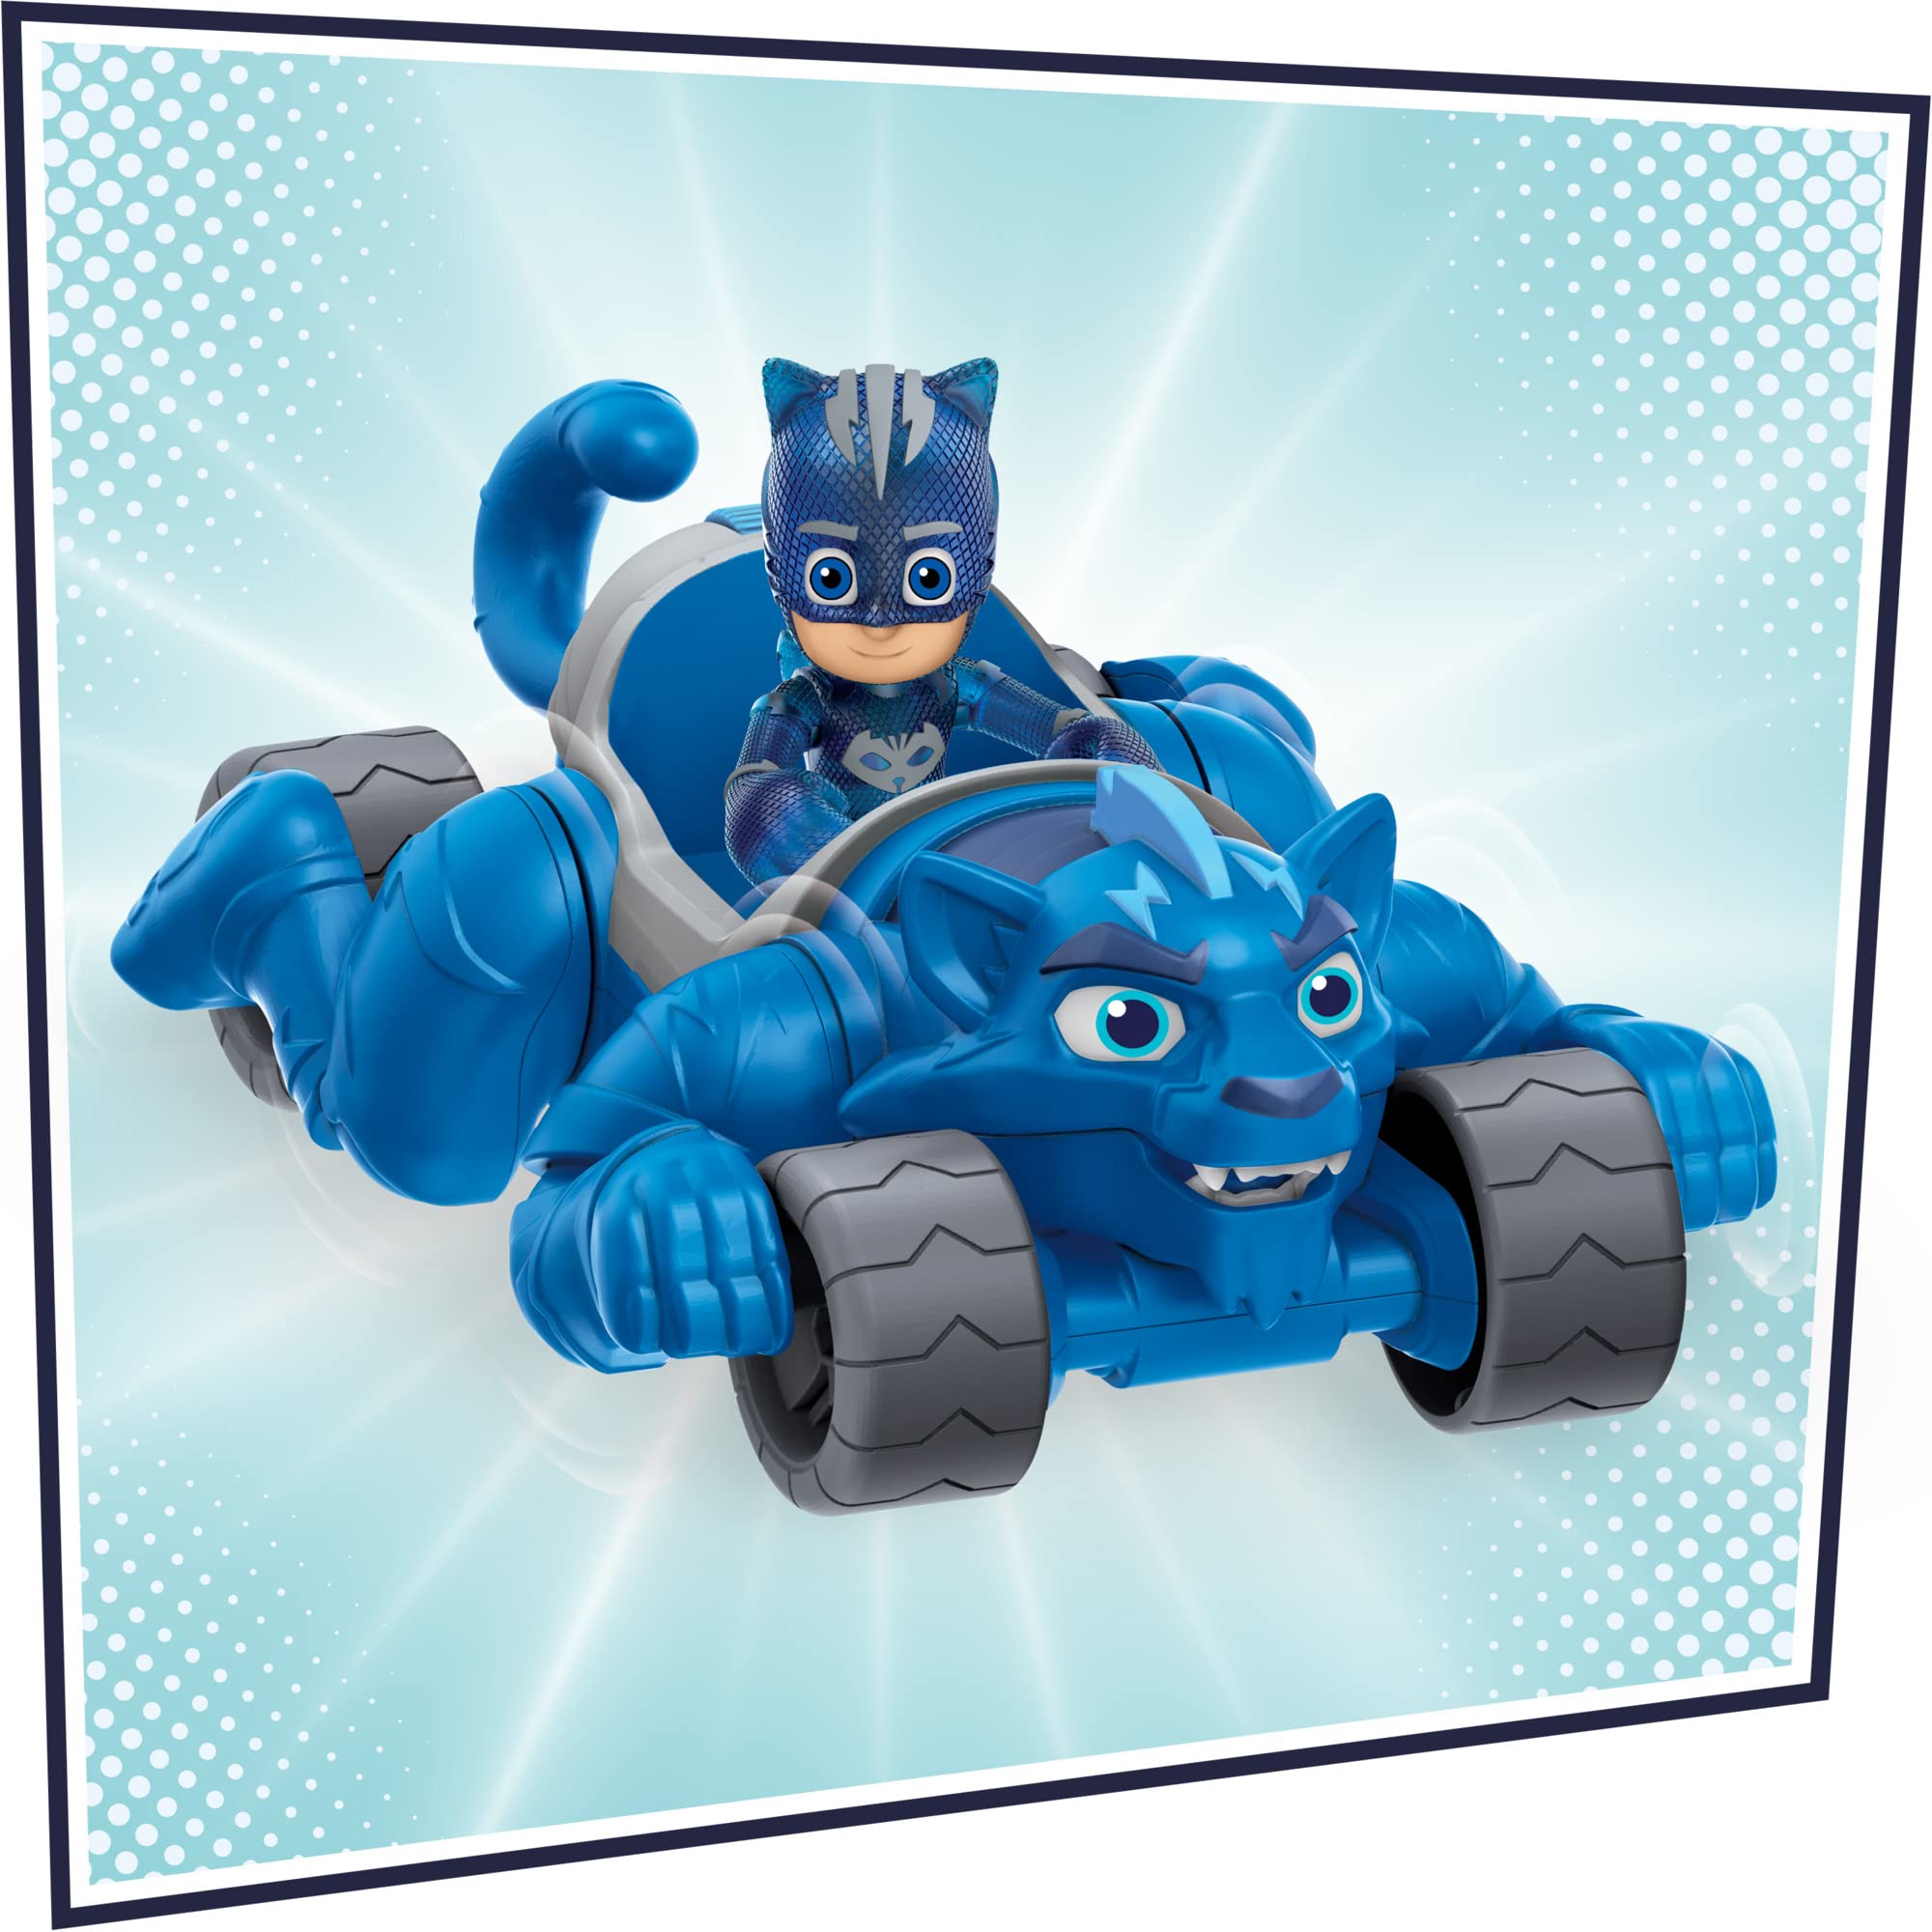 PJ Masks Animal Power Catboy Animal Rider Toy Car, with Catboy Action Figure, Deluxe Toy Vehicles, Superhero Toys, Preschool Toys for 3 Year Old Boys and Girls and Up